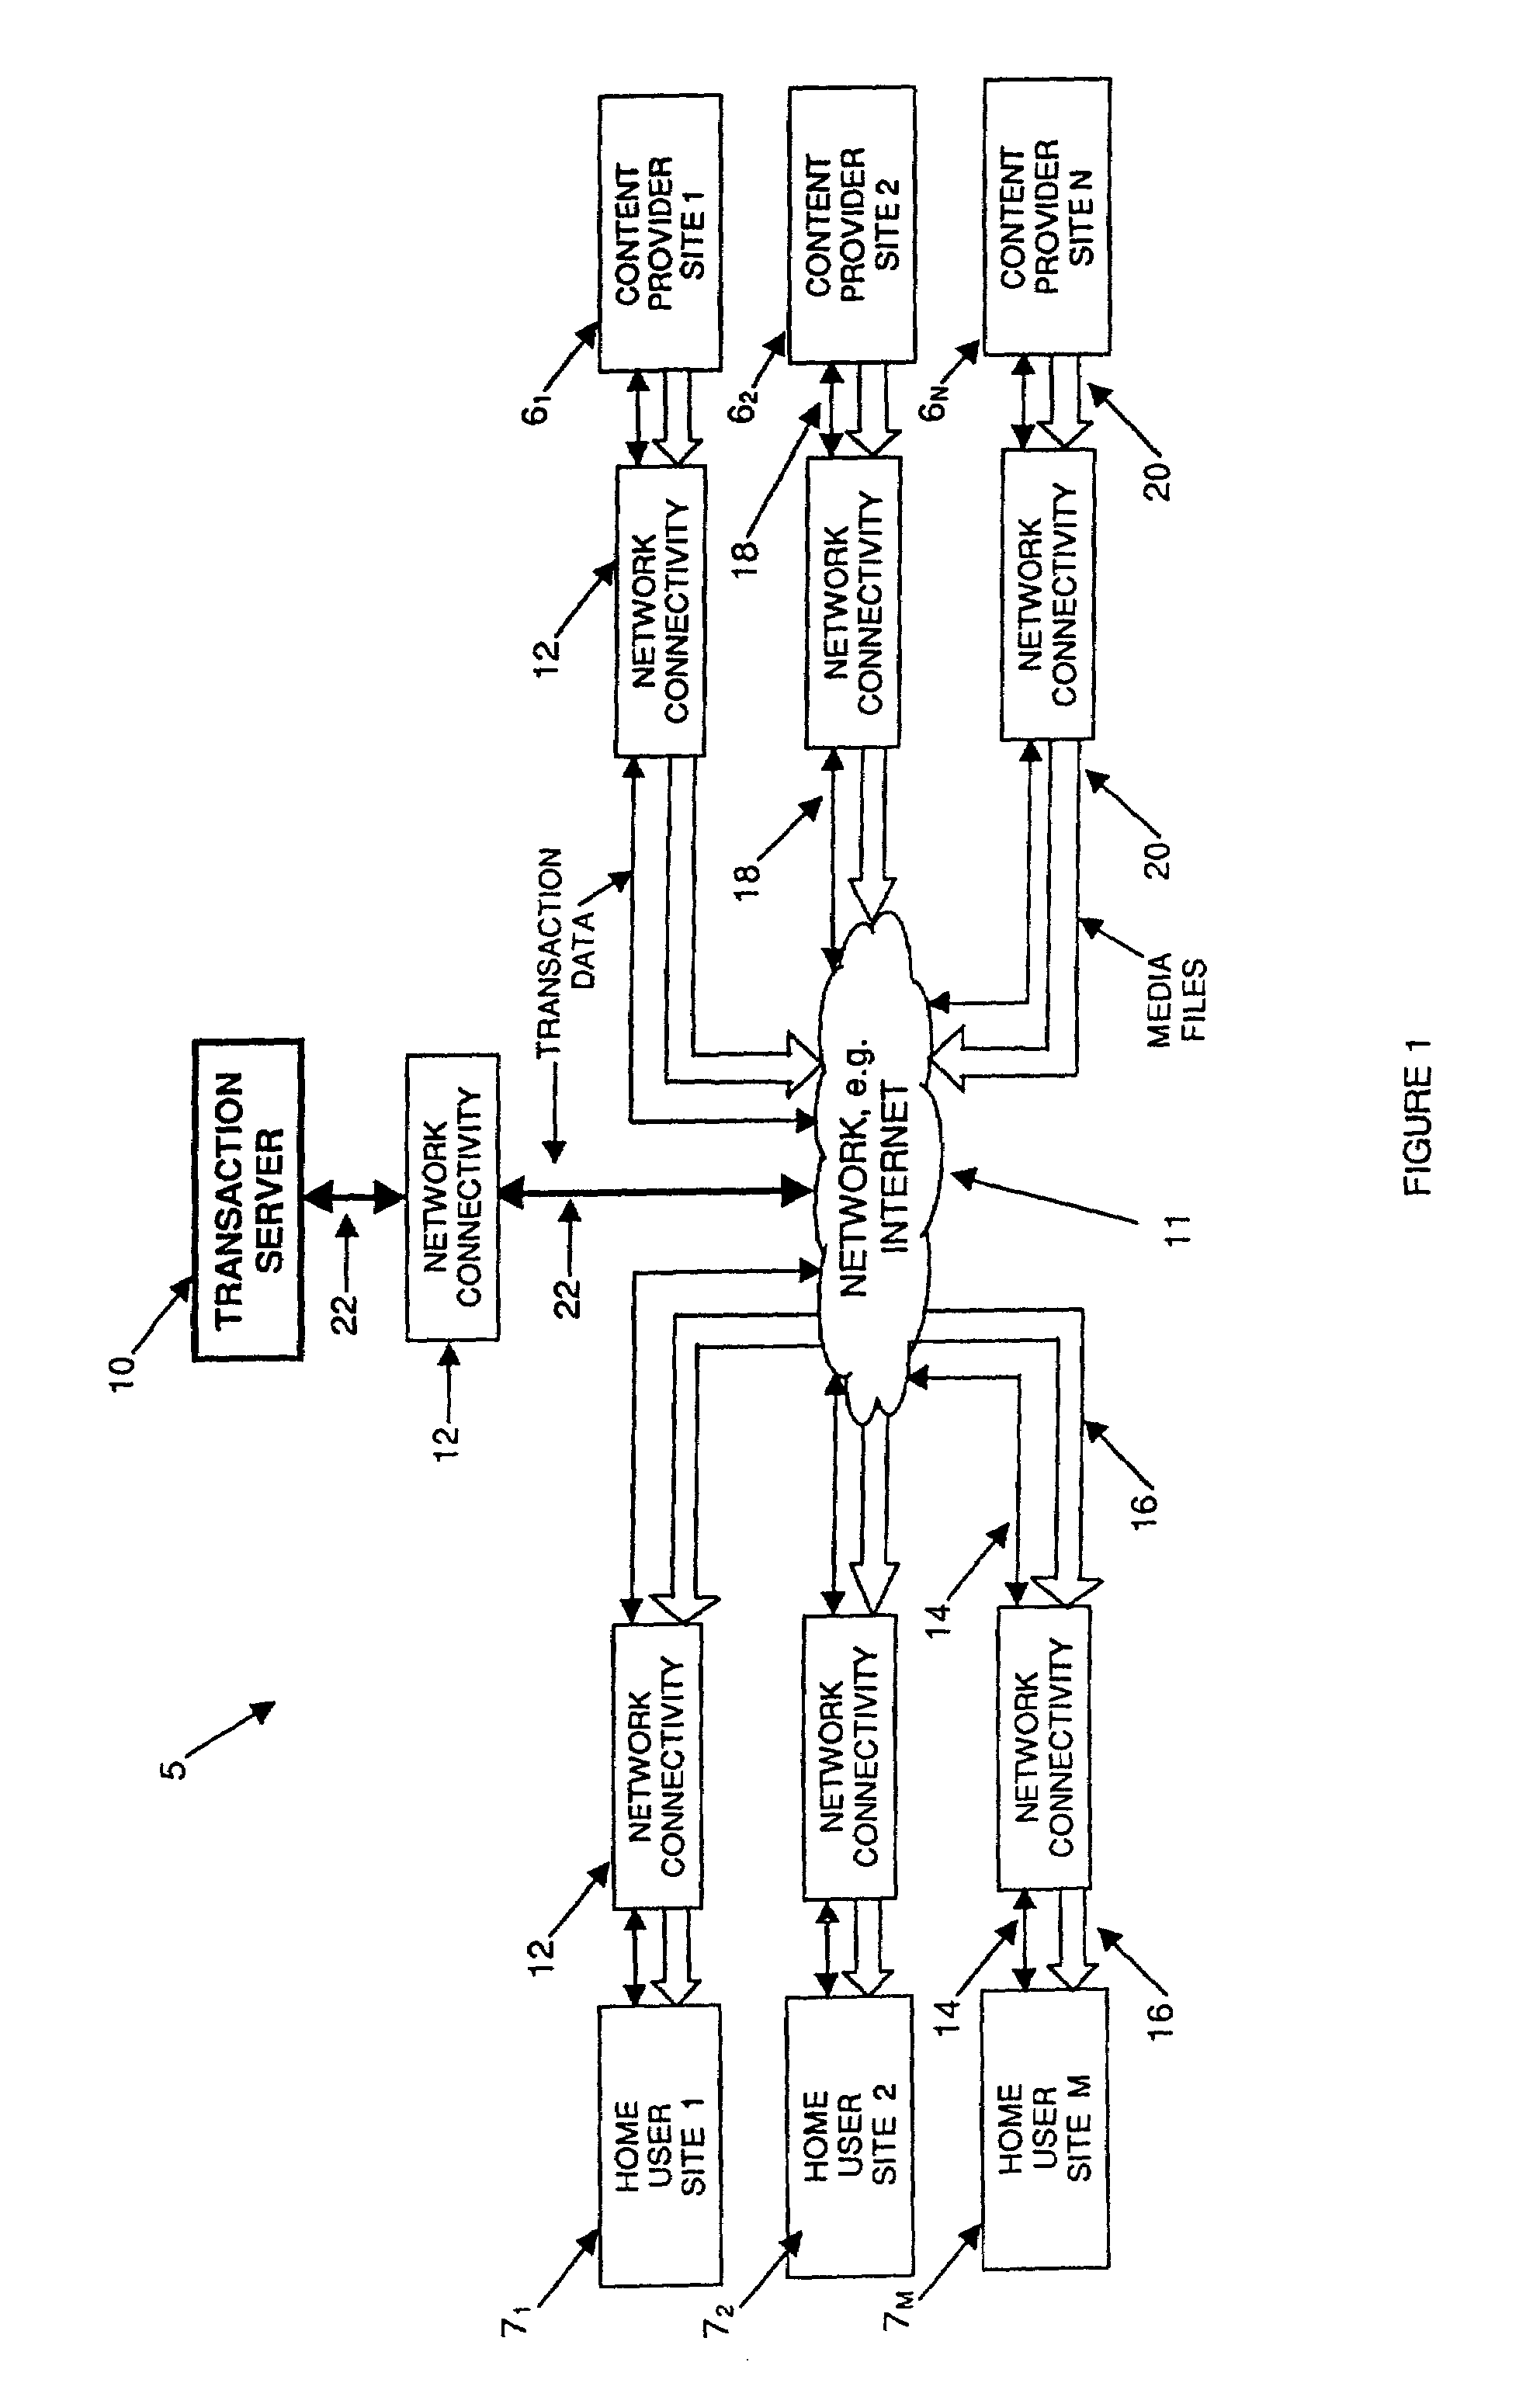 Transaction system for transporting media files from content provider sources to home entertainment devices